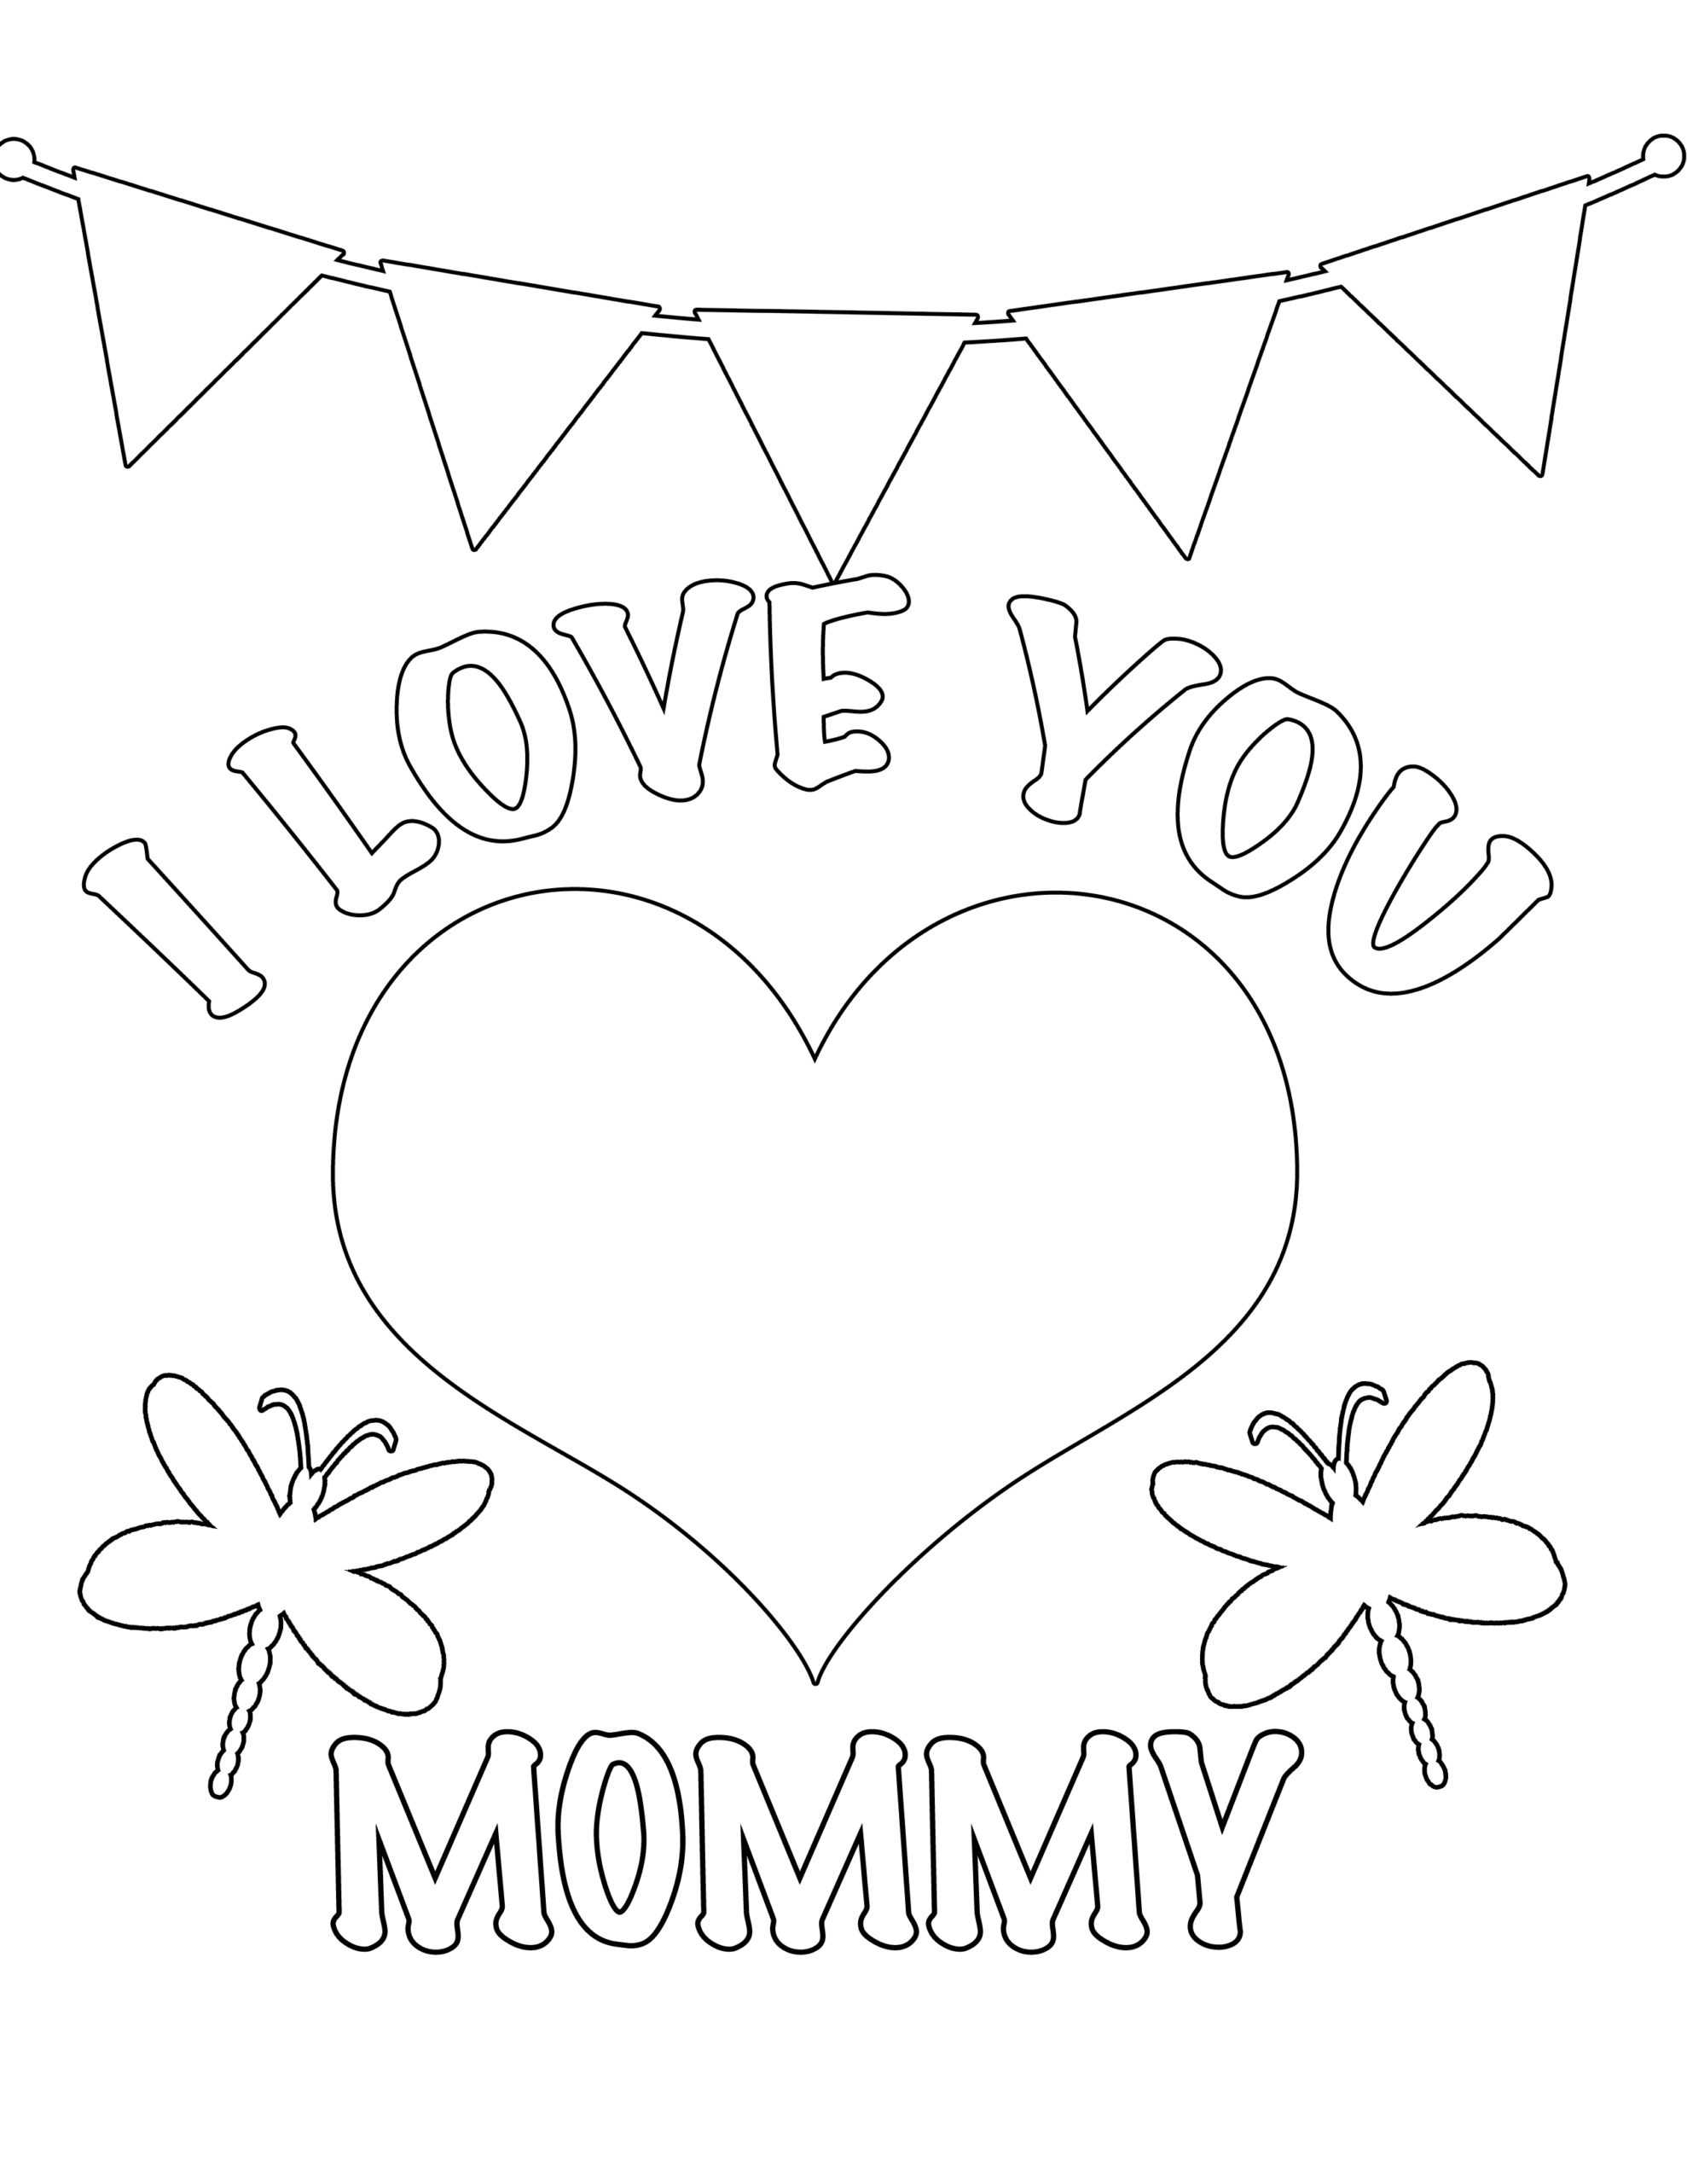 Coloring Pages : Best Coloring Tremendouss Cards Photo Ideas With Valentine Card Template For Kids